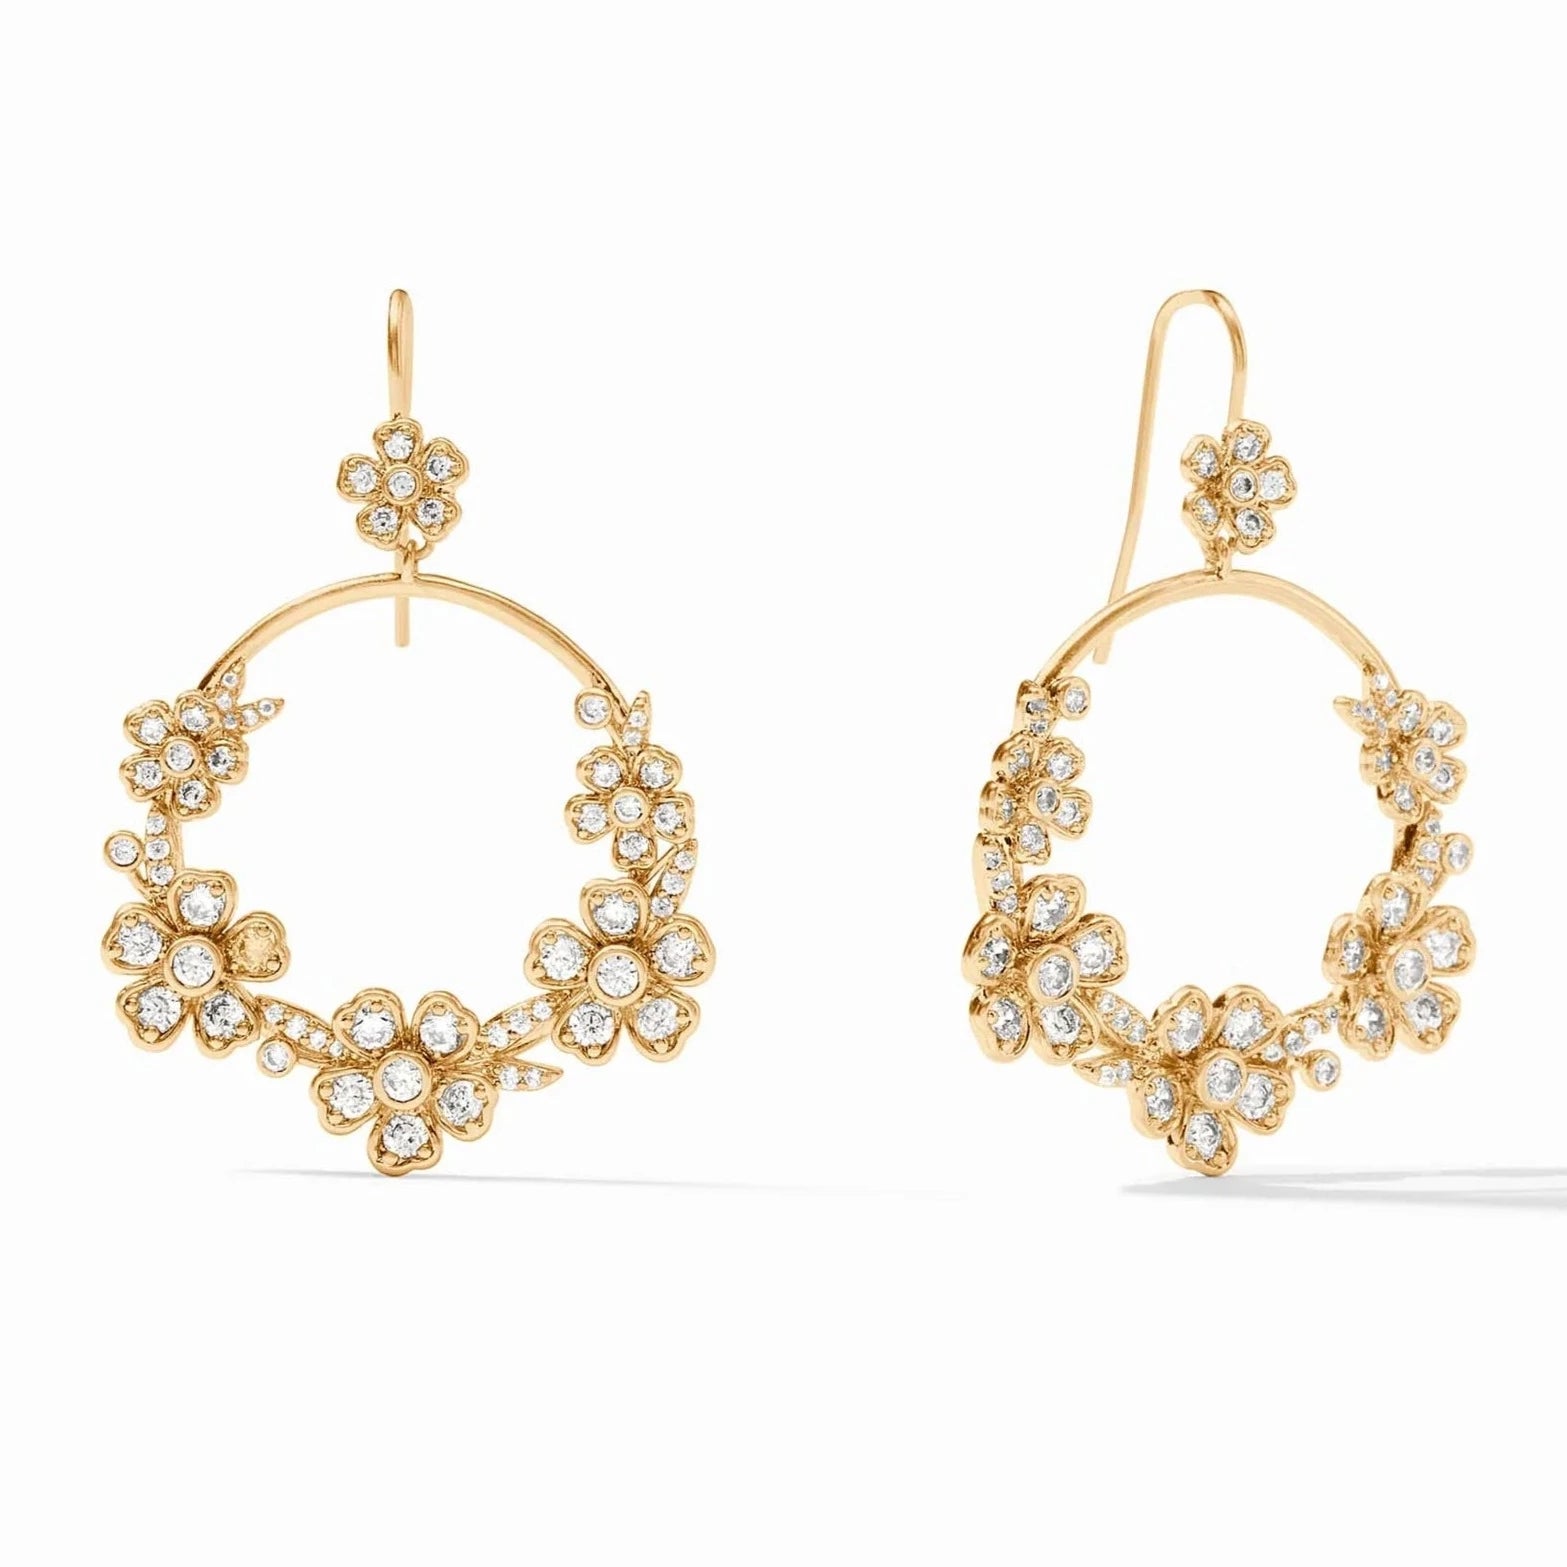 Julie Vos 24K Gold Plated Laurel Drop Earrings with Cubic Zirconia